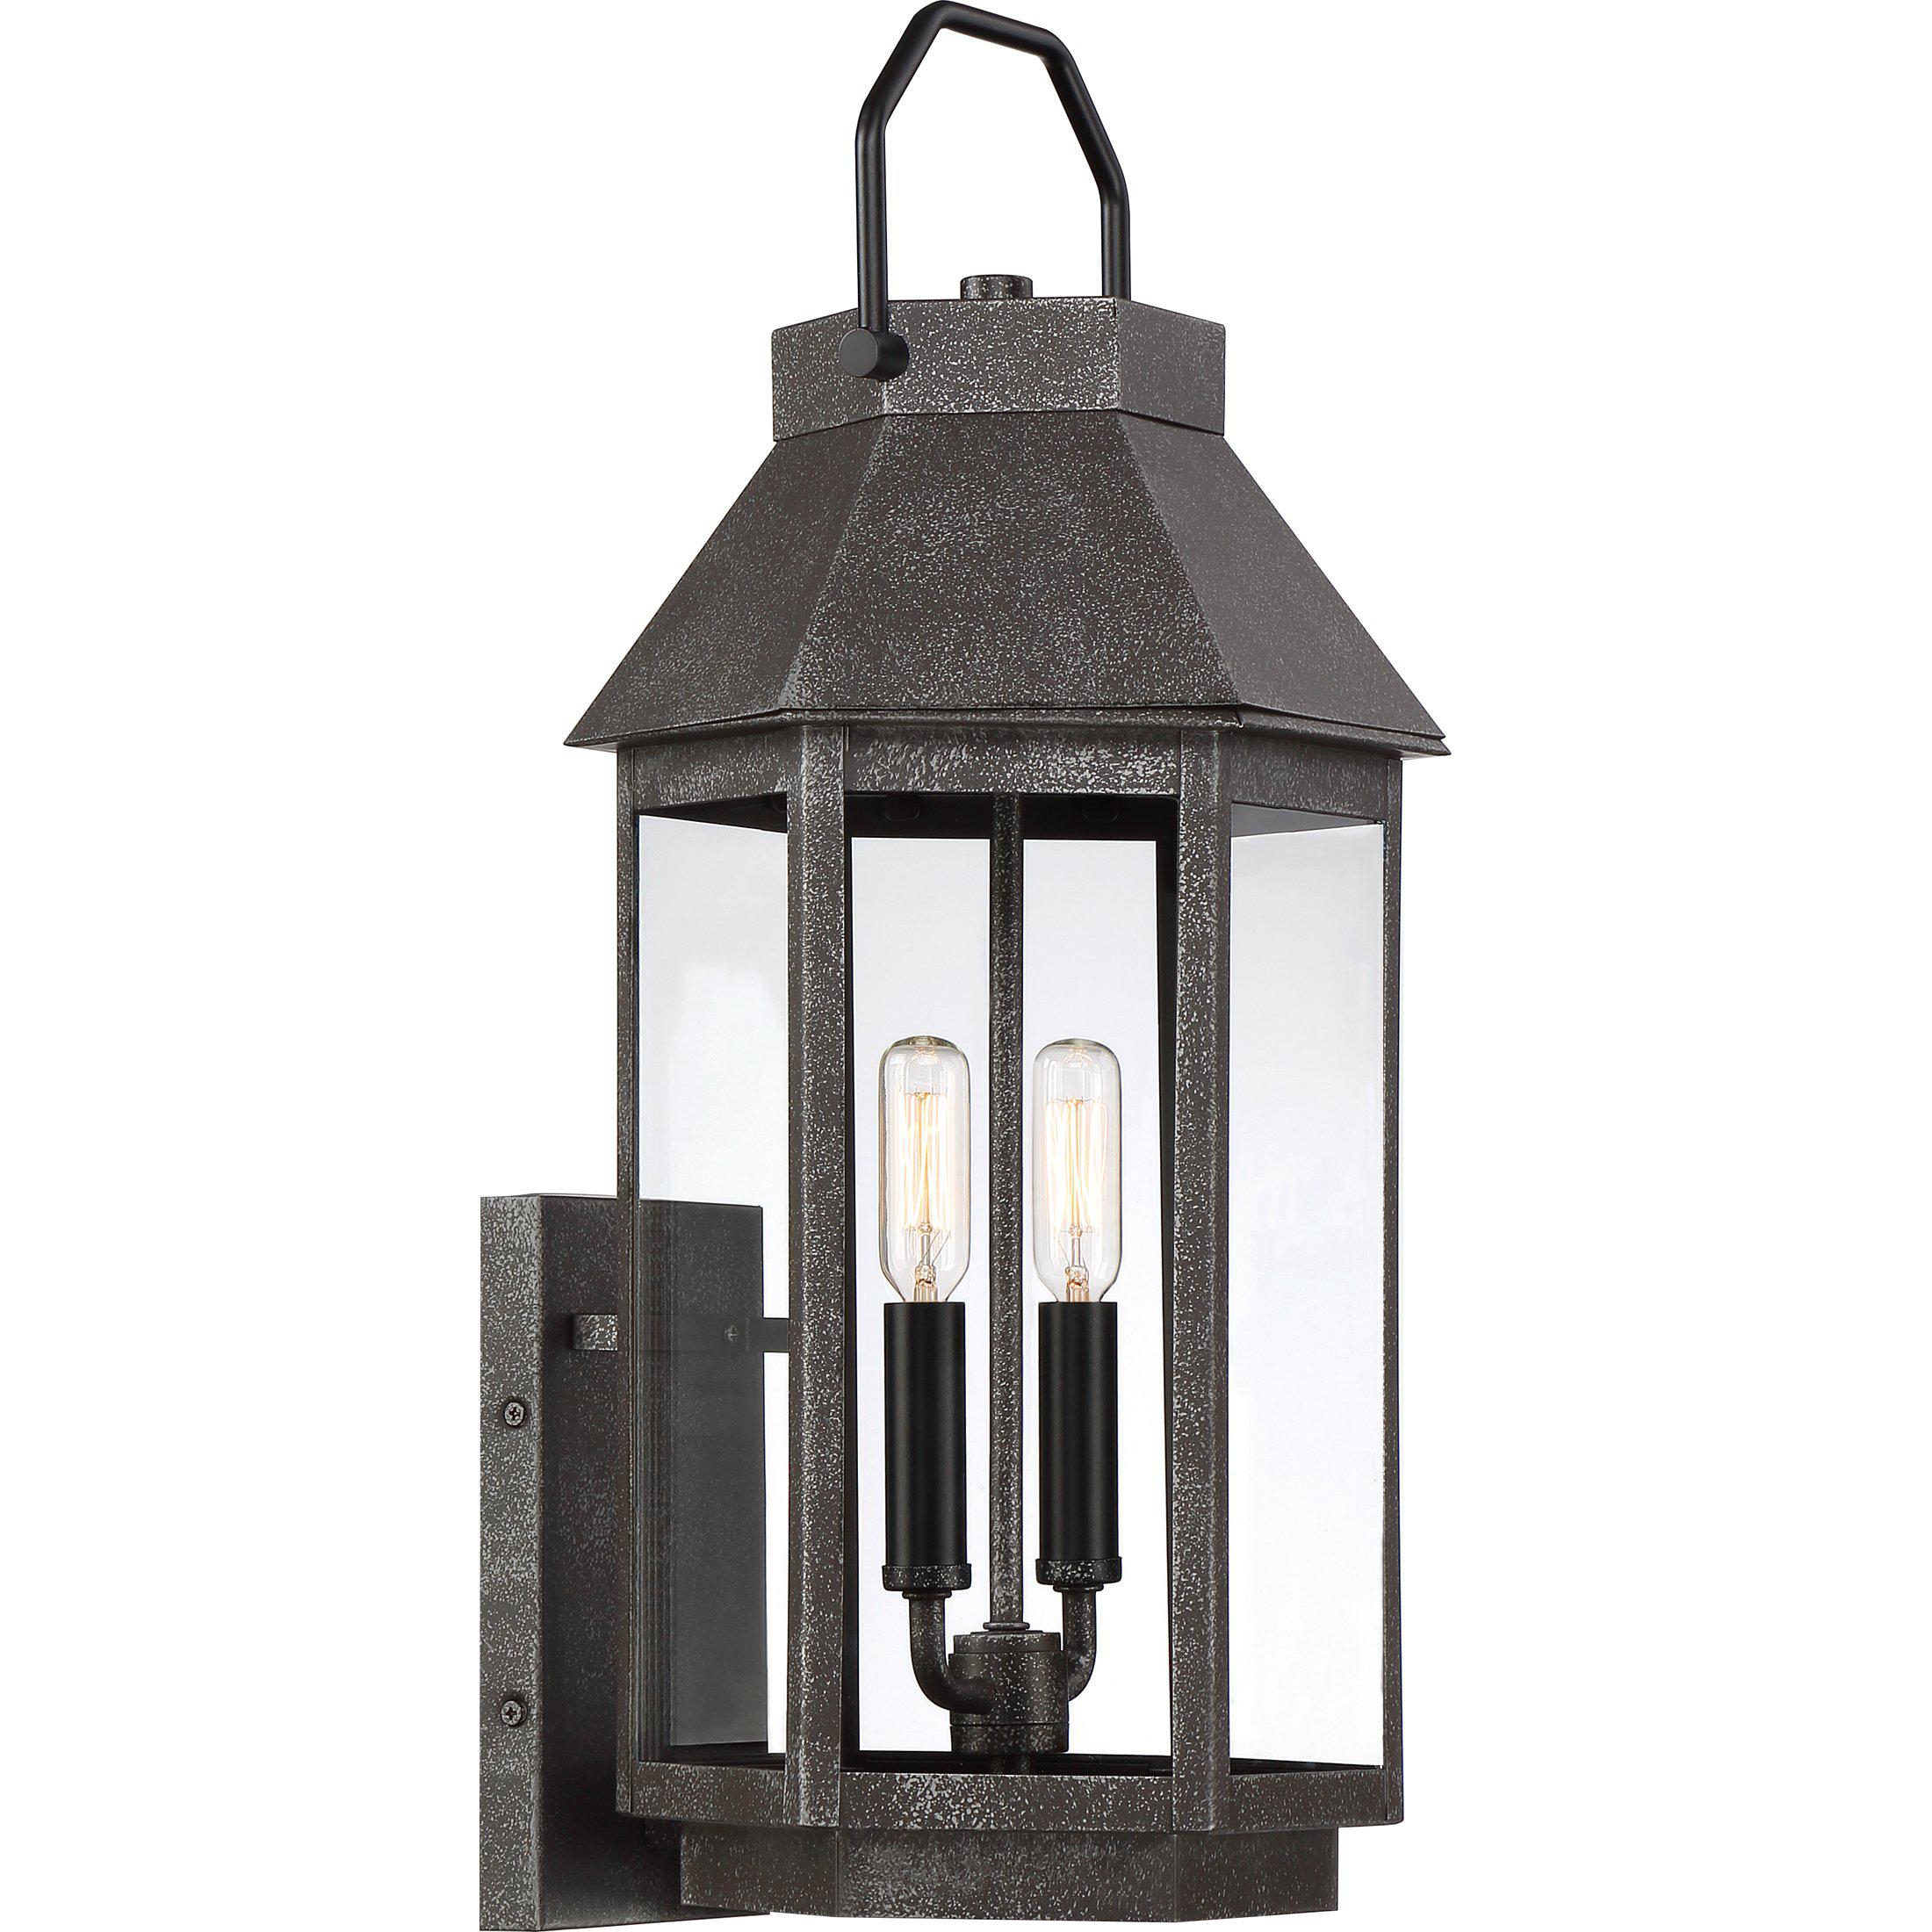 Quoizel  Campbell Outdoor Lantern, Large Outdoor l Wall Quoizel Speckled Black  